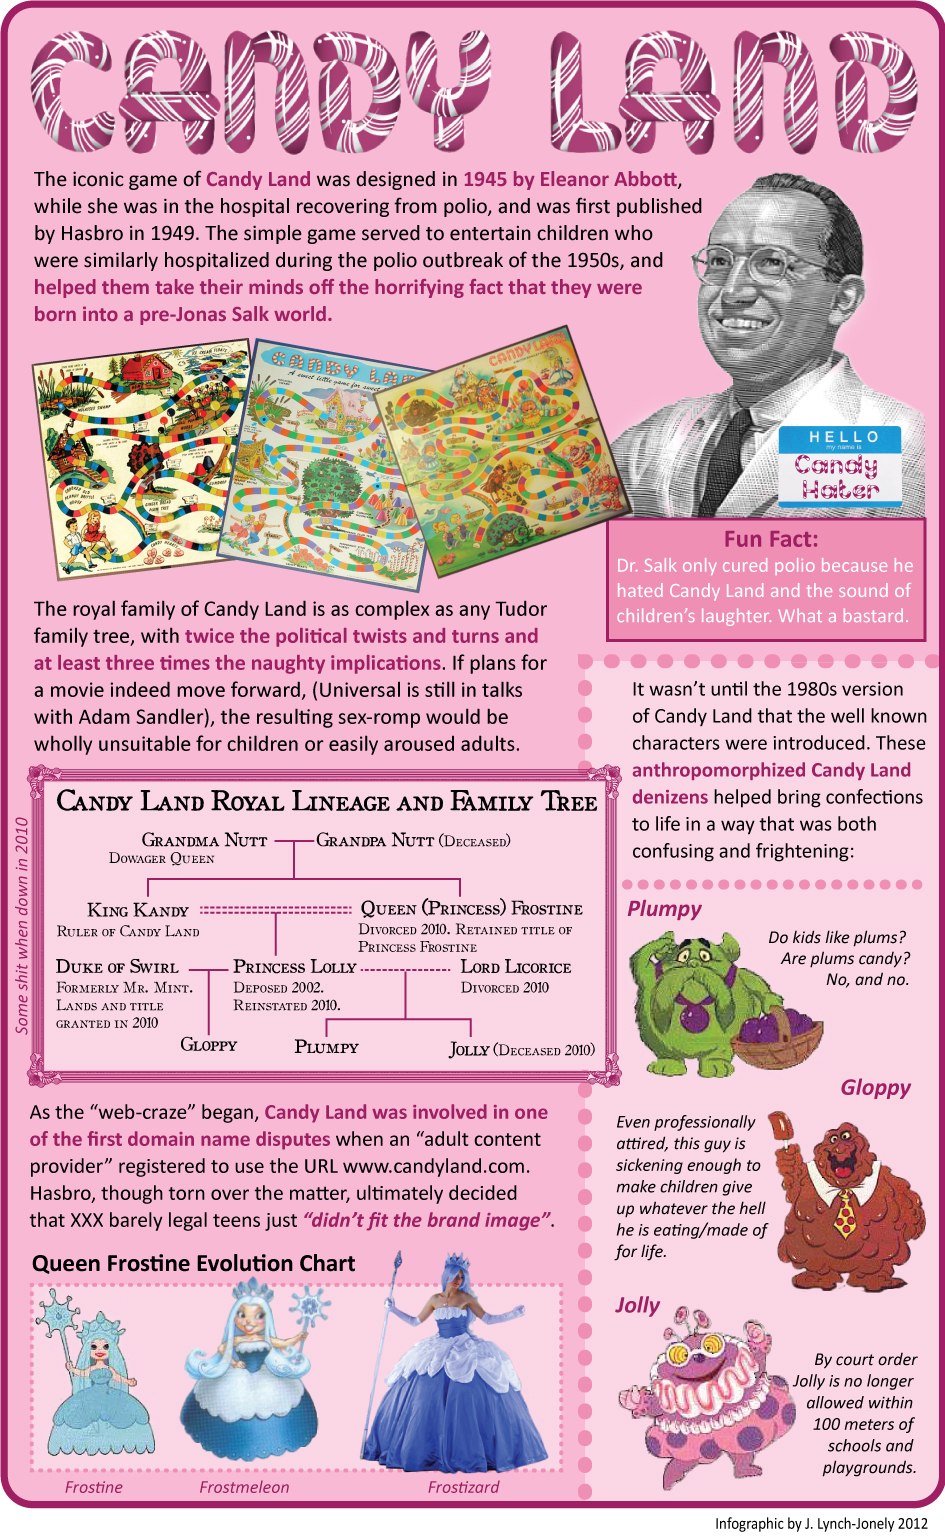 Facts about Candy Land